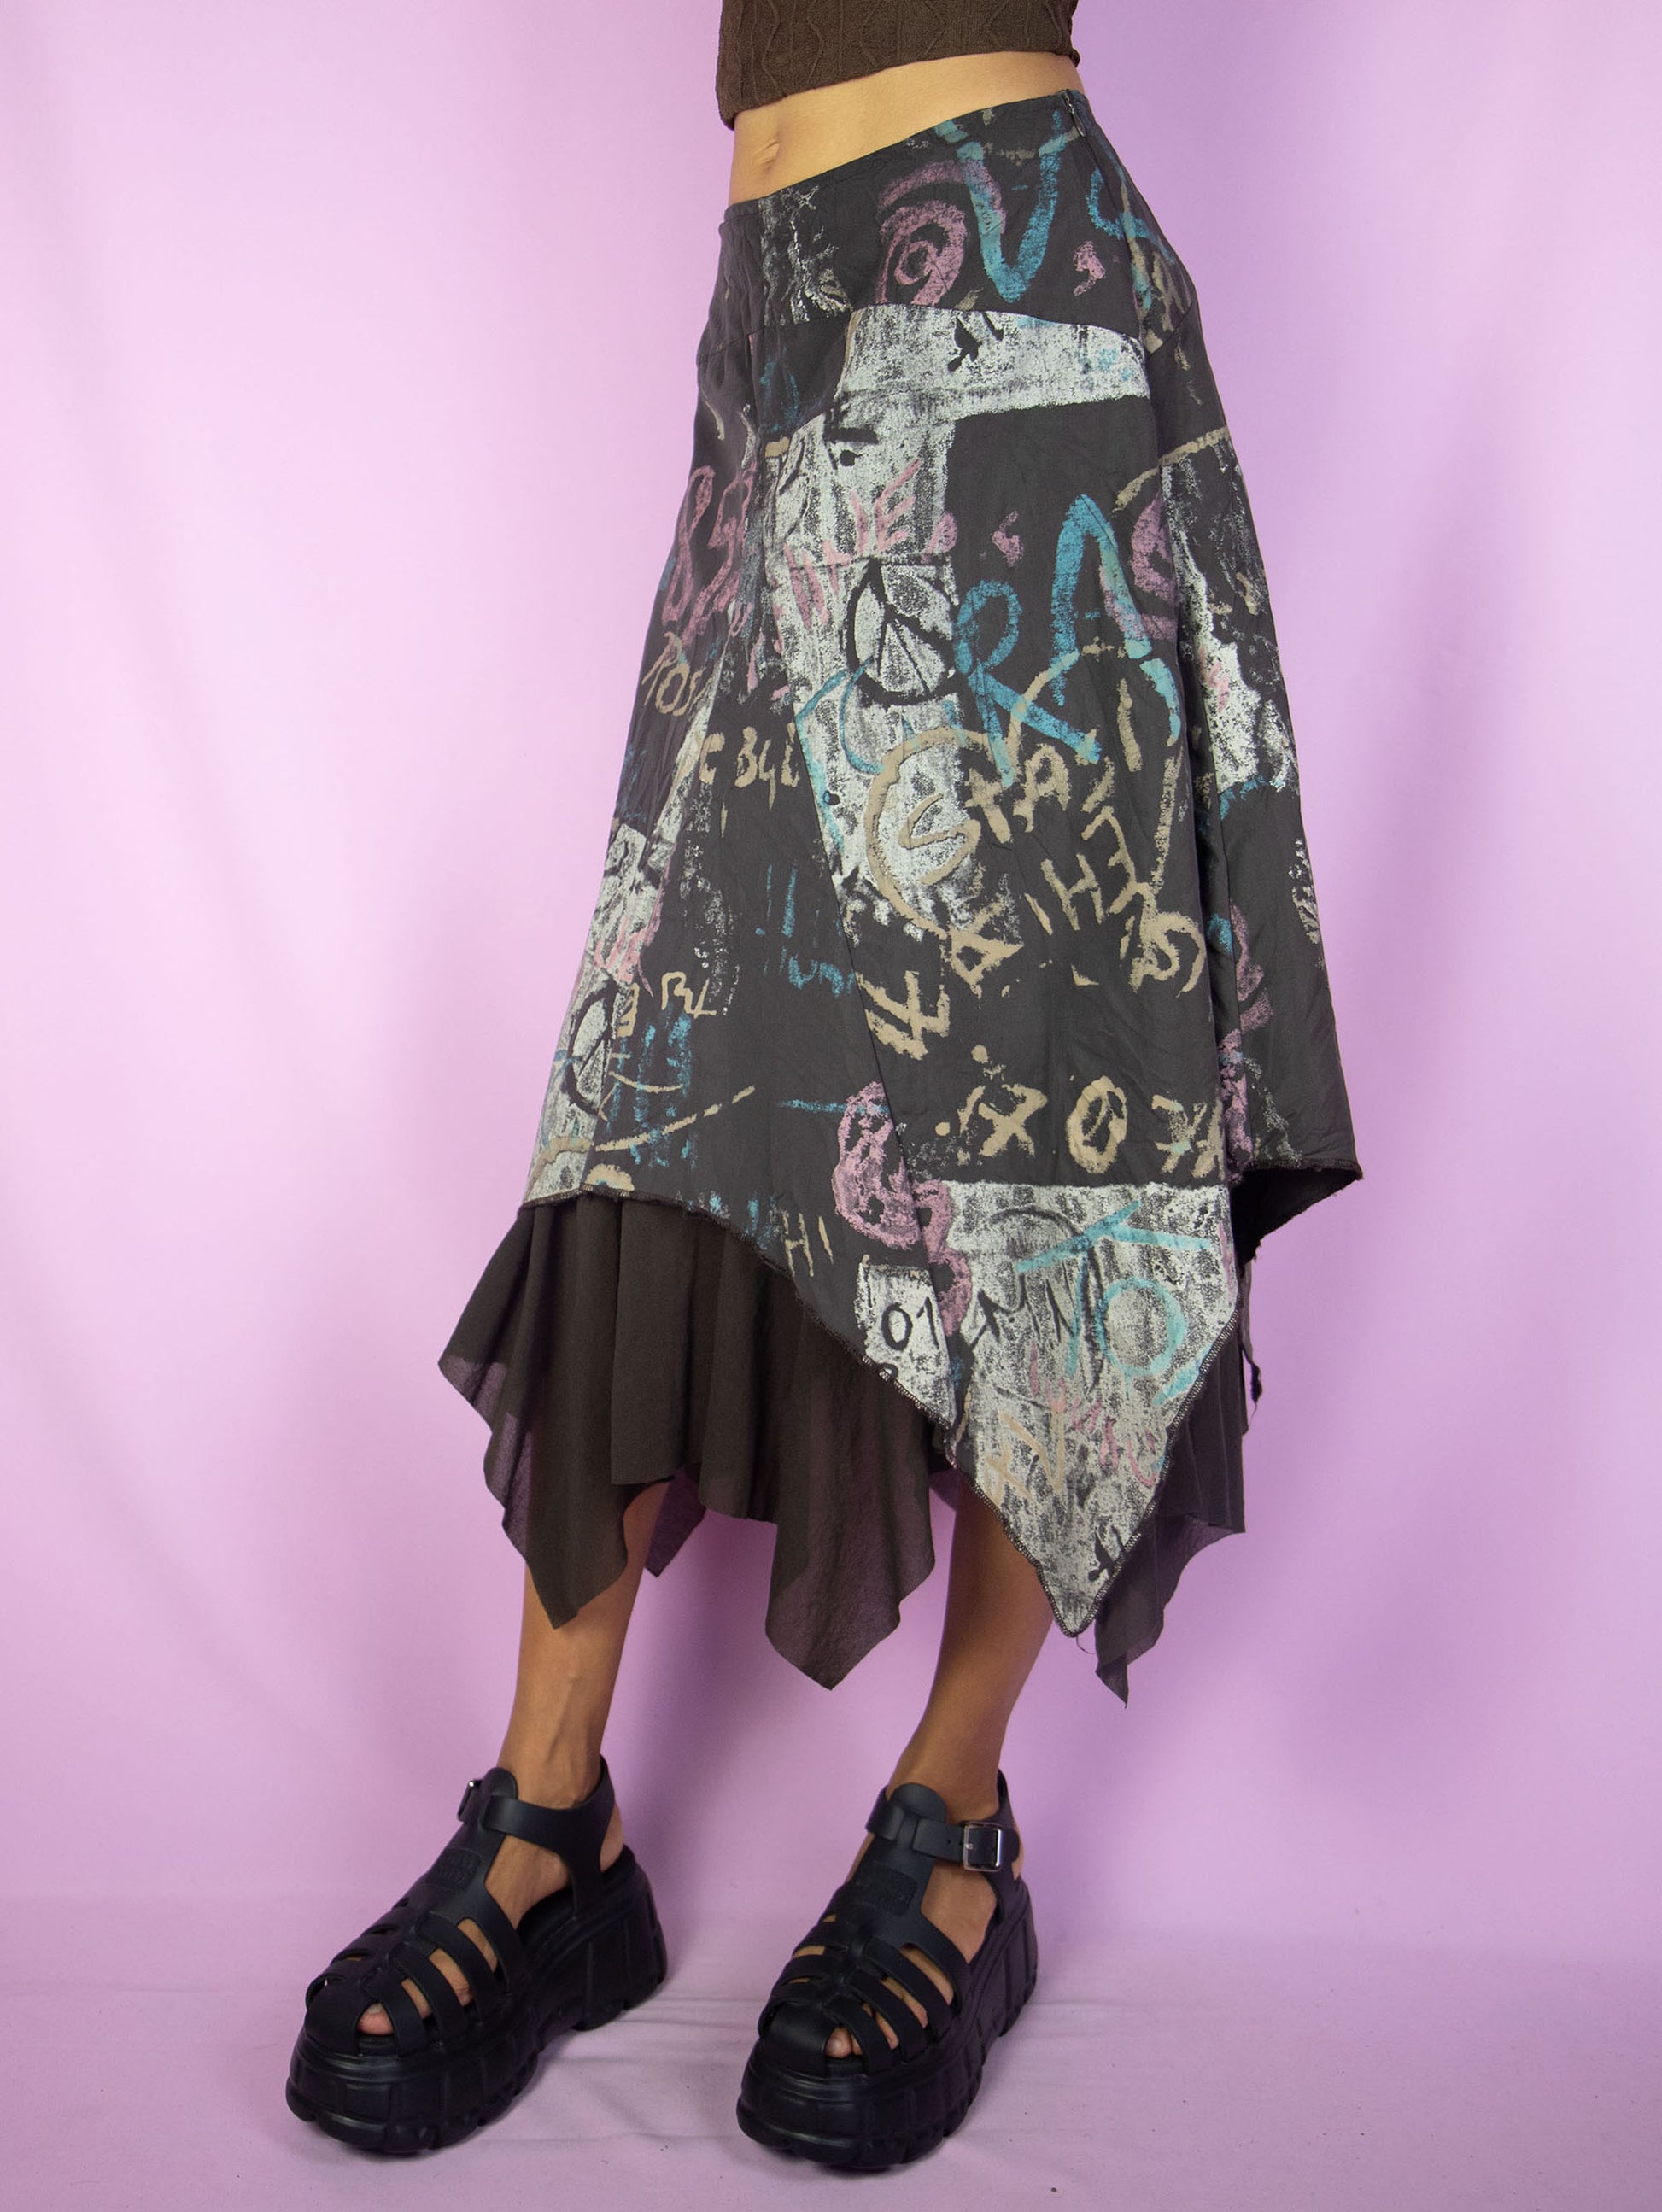 The Y2K Layered Asymmetric Midi Skirt is a vintage 2000s cyber subversive party style dark brown abstract printed skirt with a pointed asymmetrical semi-sheer mesh hem and side zipper closure. Made in France.